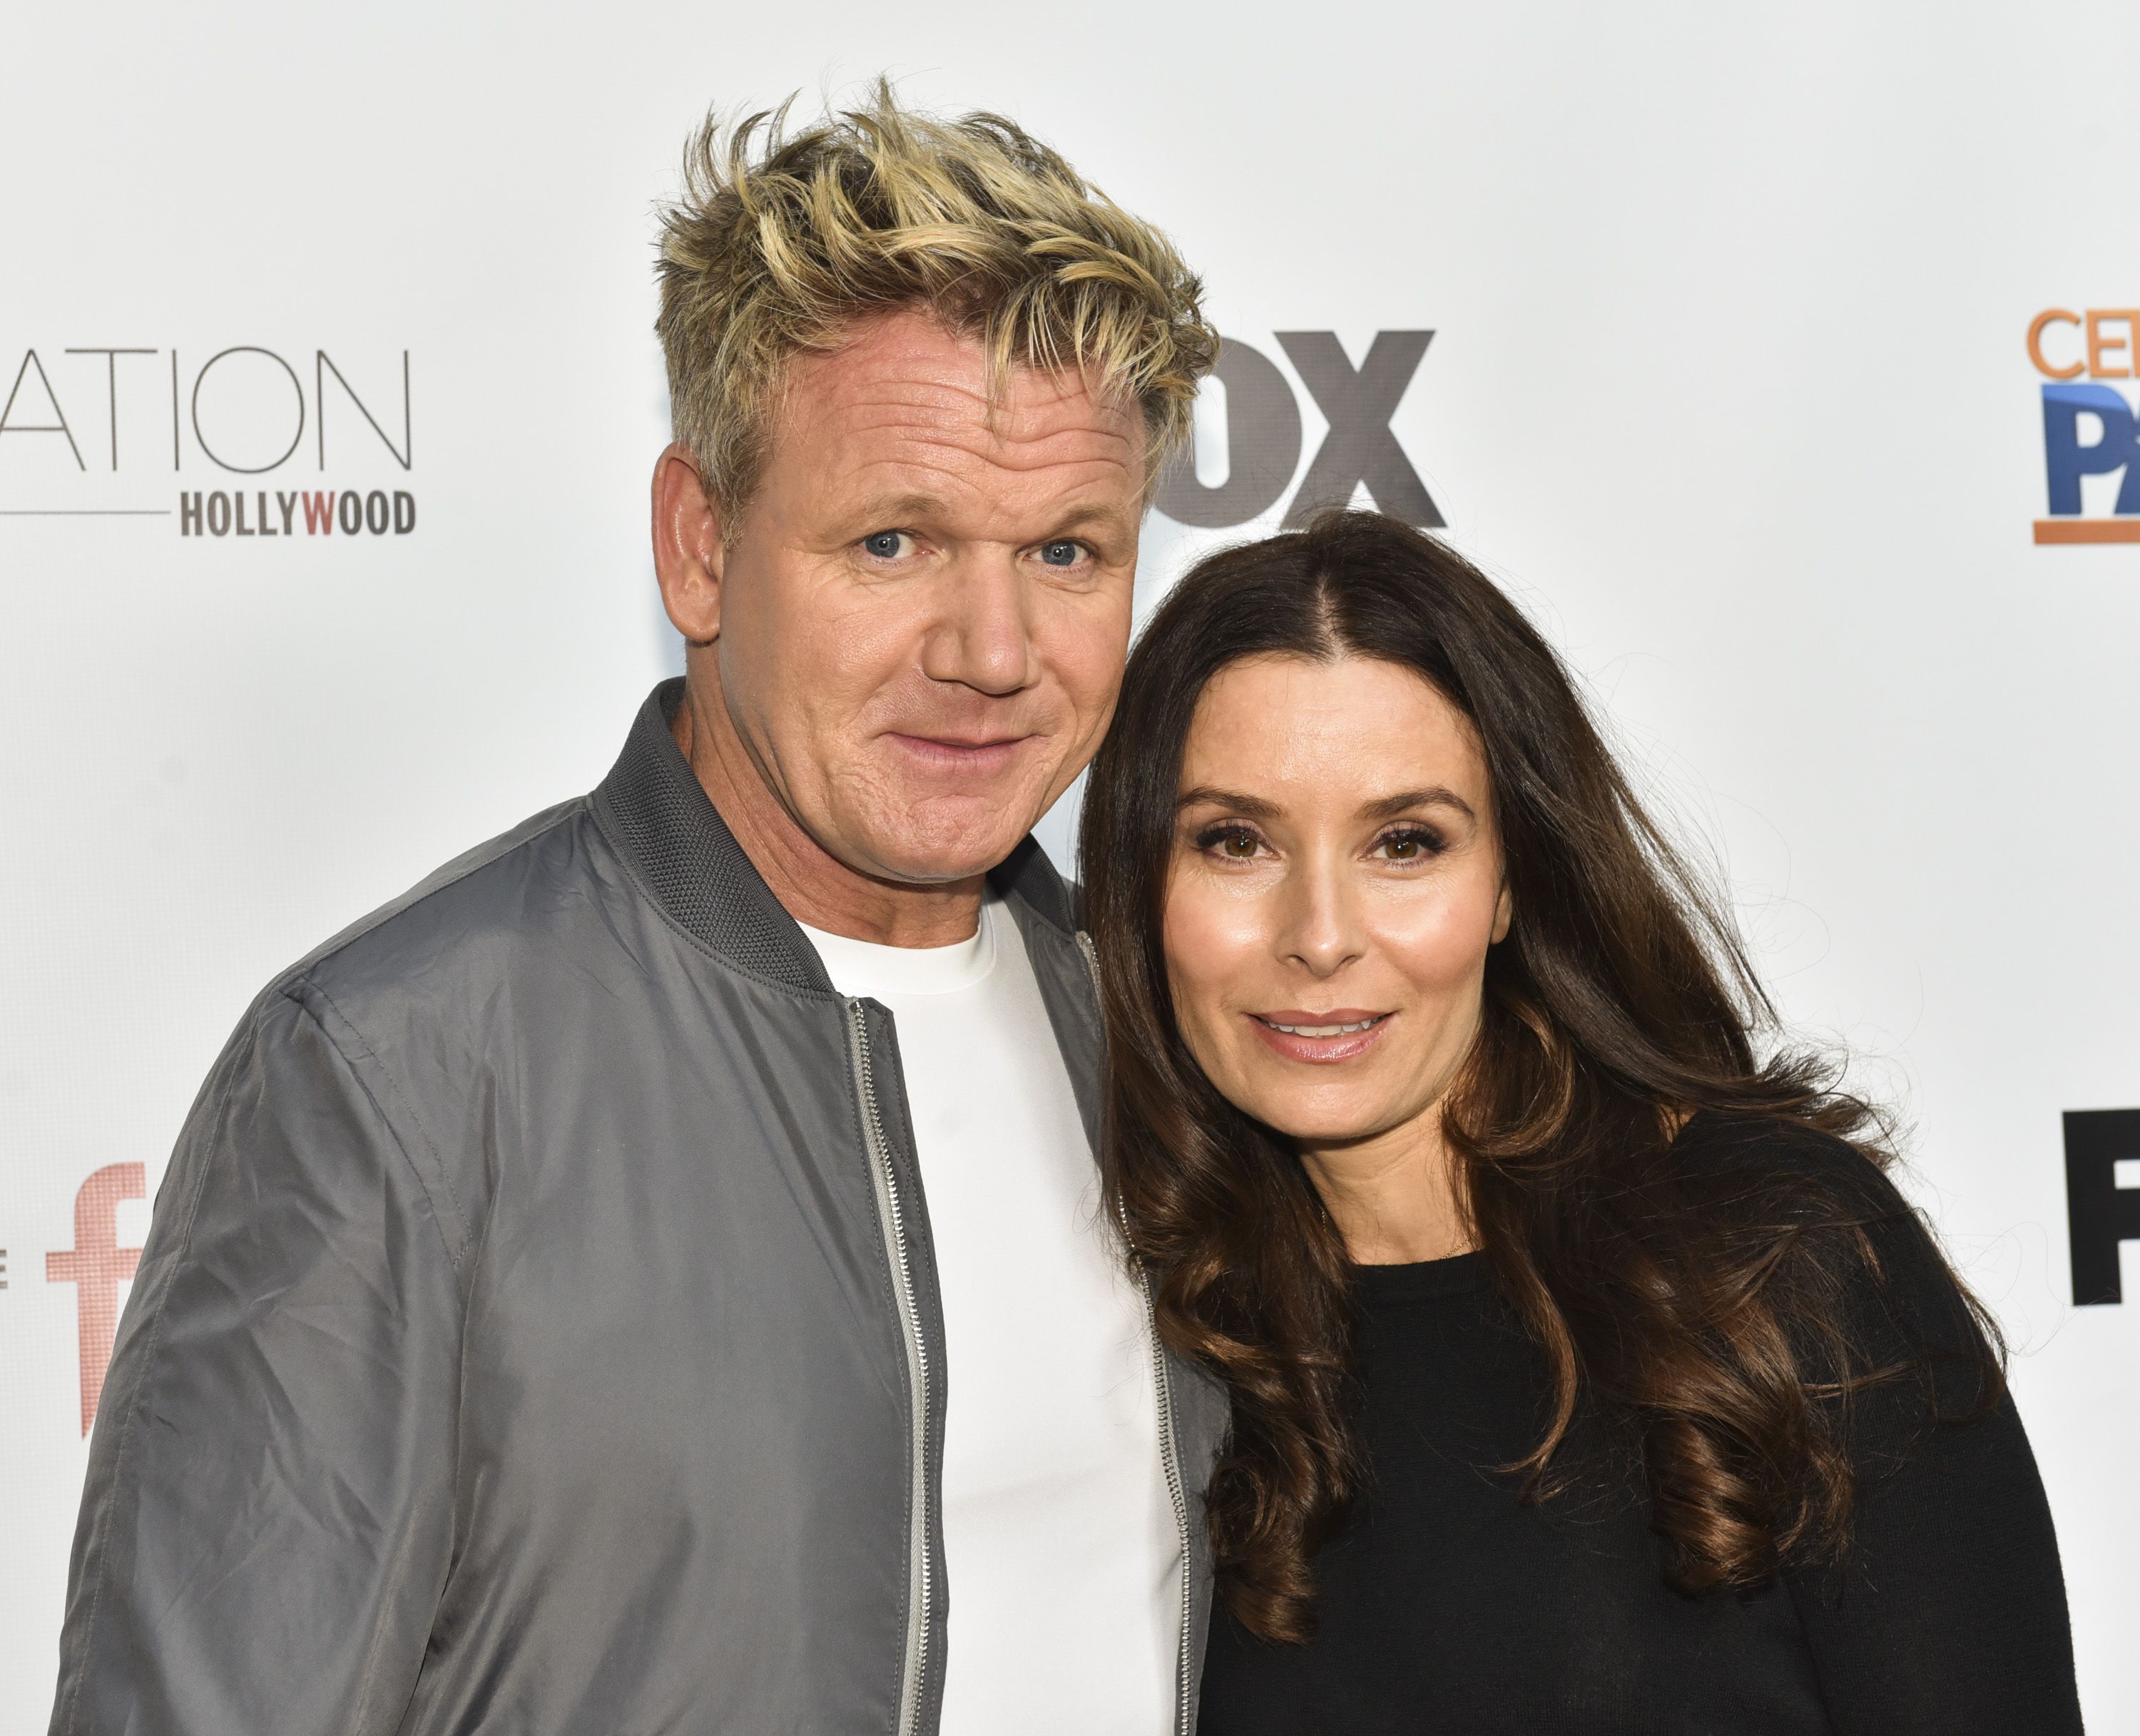 Celebrity chef Gordon Ramsay and Tana Ramsay attend "The F Word" celebration at Station Hollywood at W Hollywood Hotel on May 22, 2017 | Photo: Getty Images